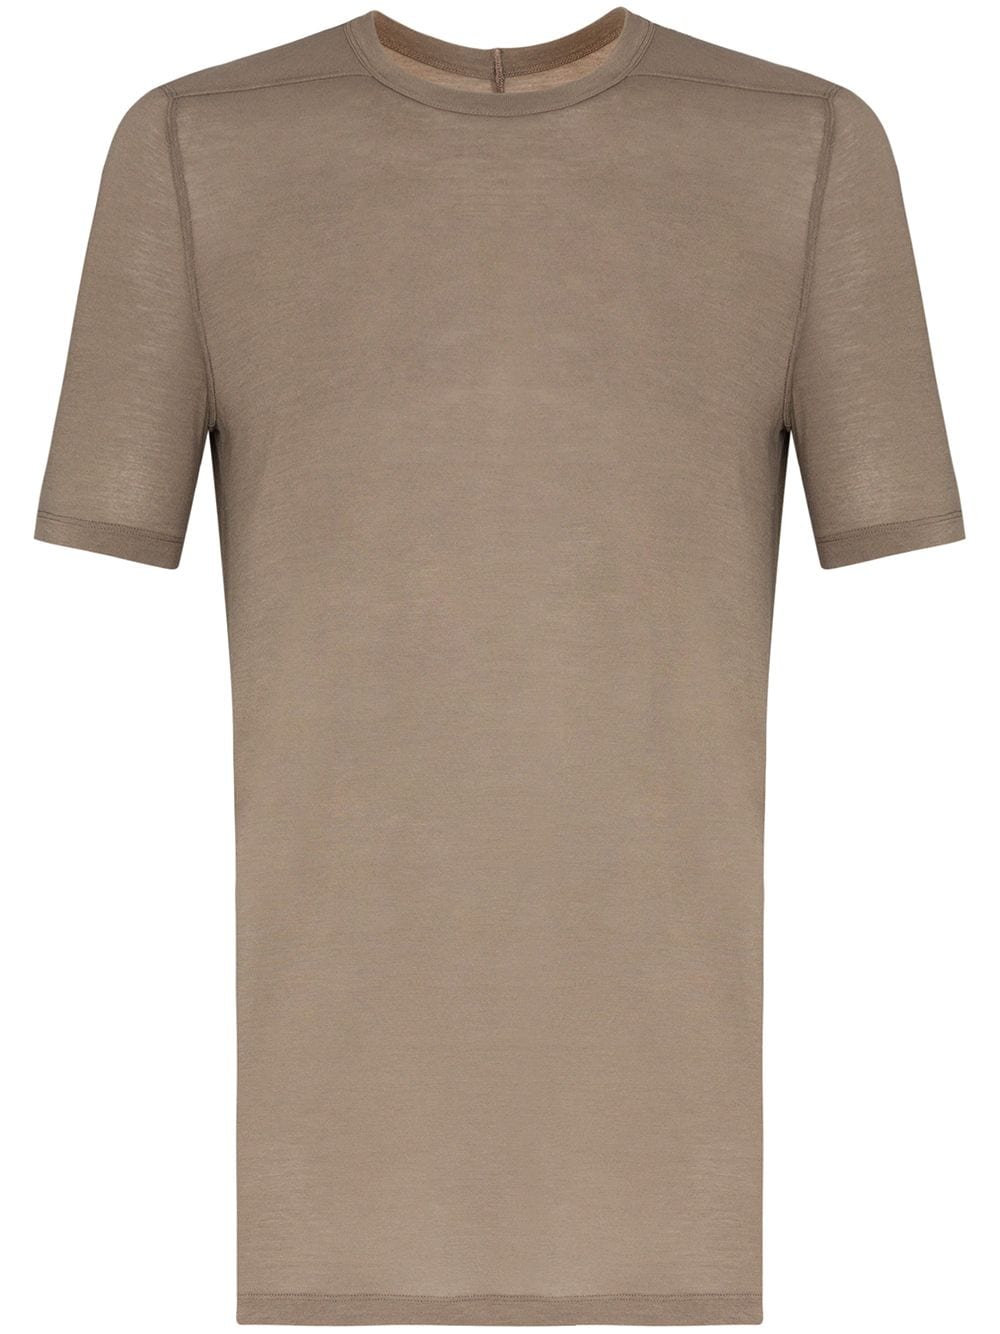 RICK OWENS LONG-LINE RELAXED T-SHIRT